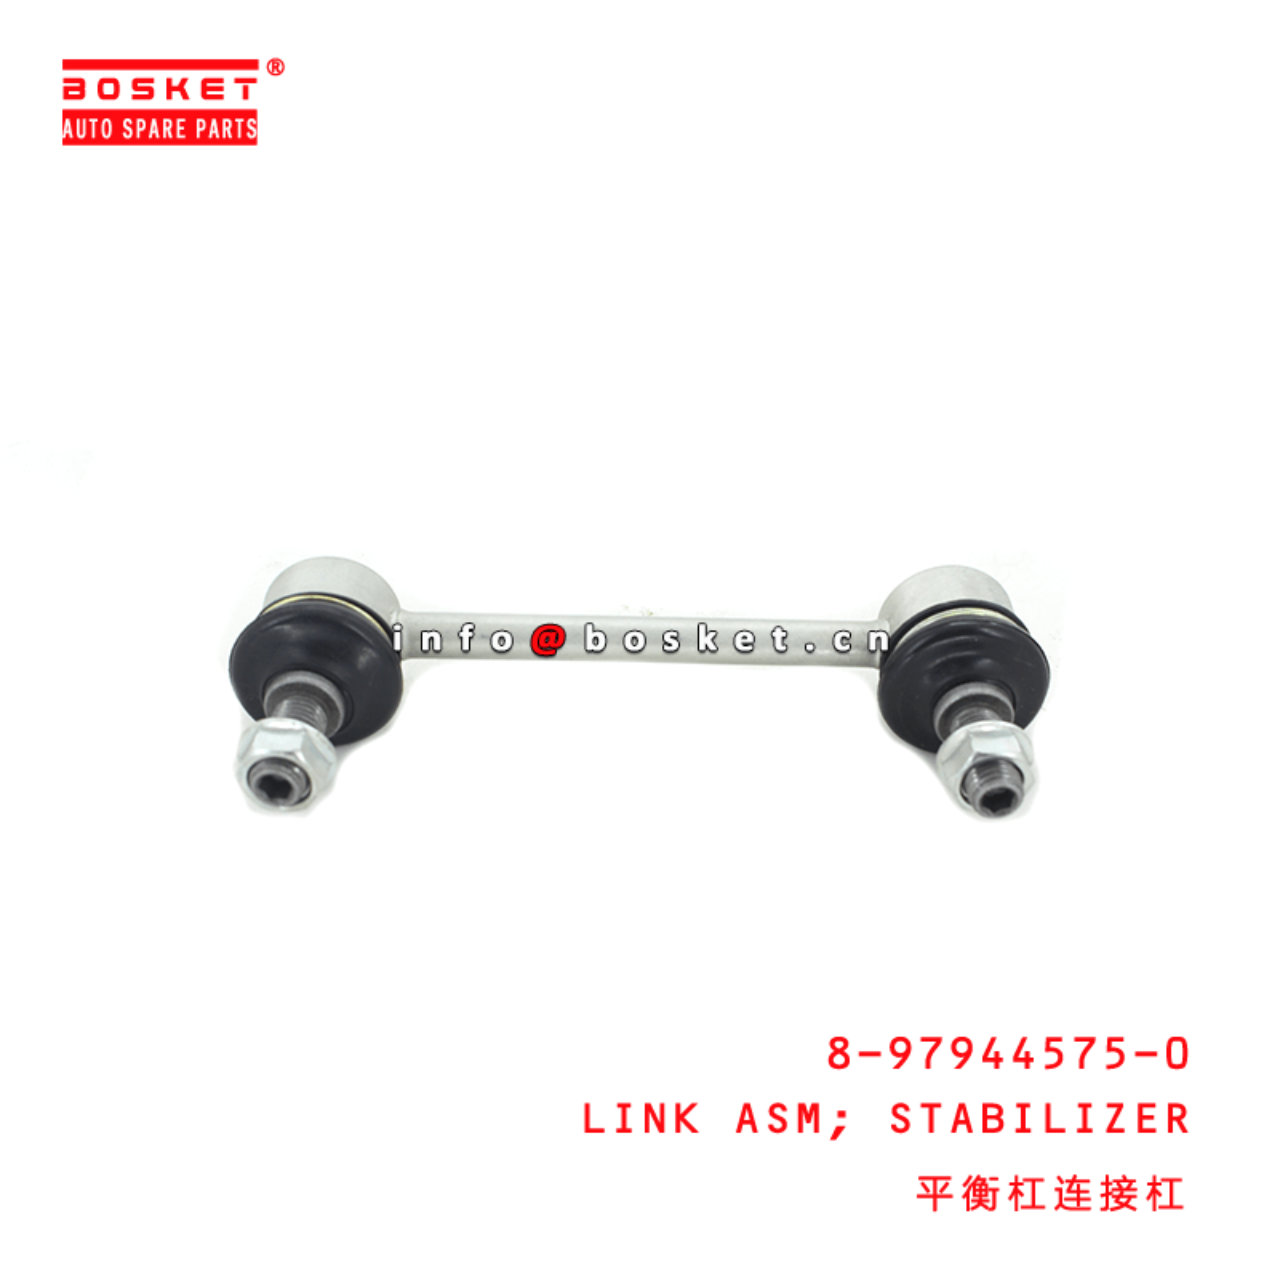 8-97944575-0 Stabilizer Link Assembly 8979445750 Suitable for ISUZU D-MAX 4X2